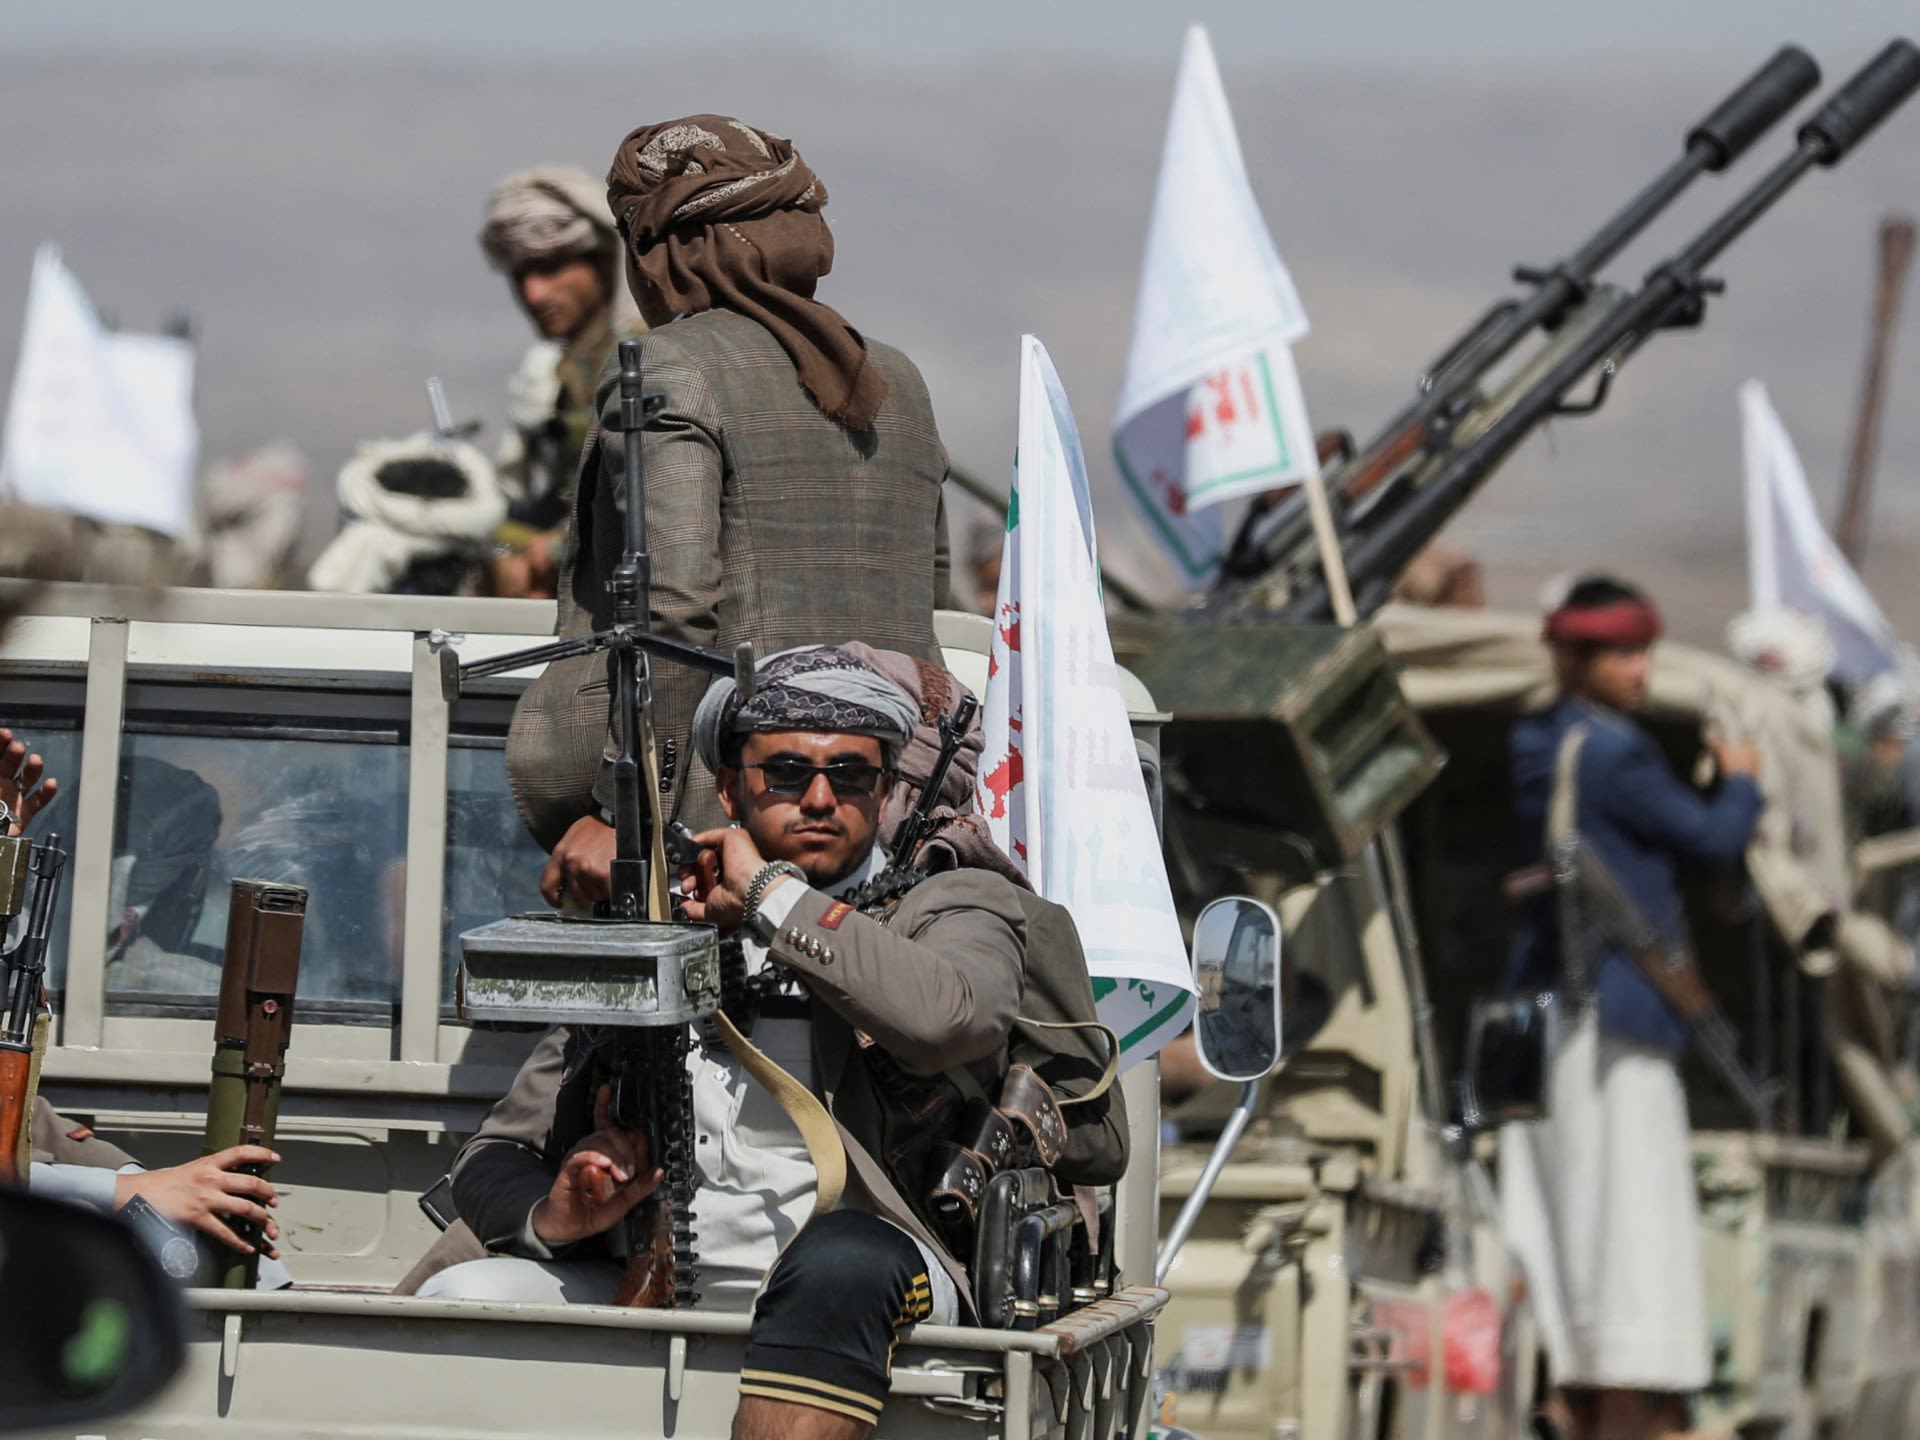 Yemen’s Houthis detain UN staff, aid workers